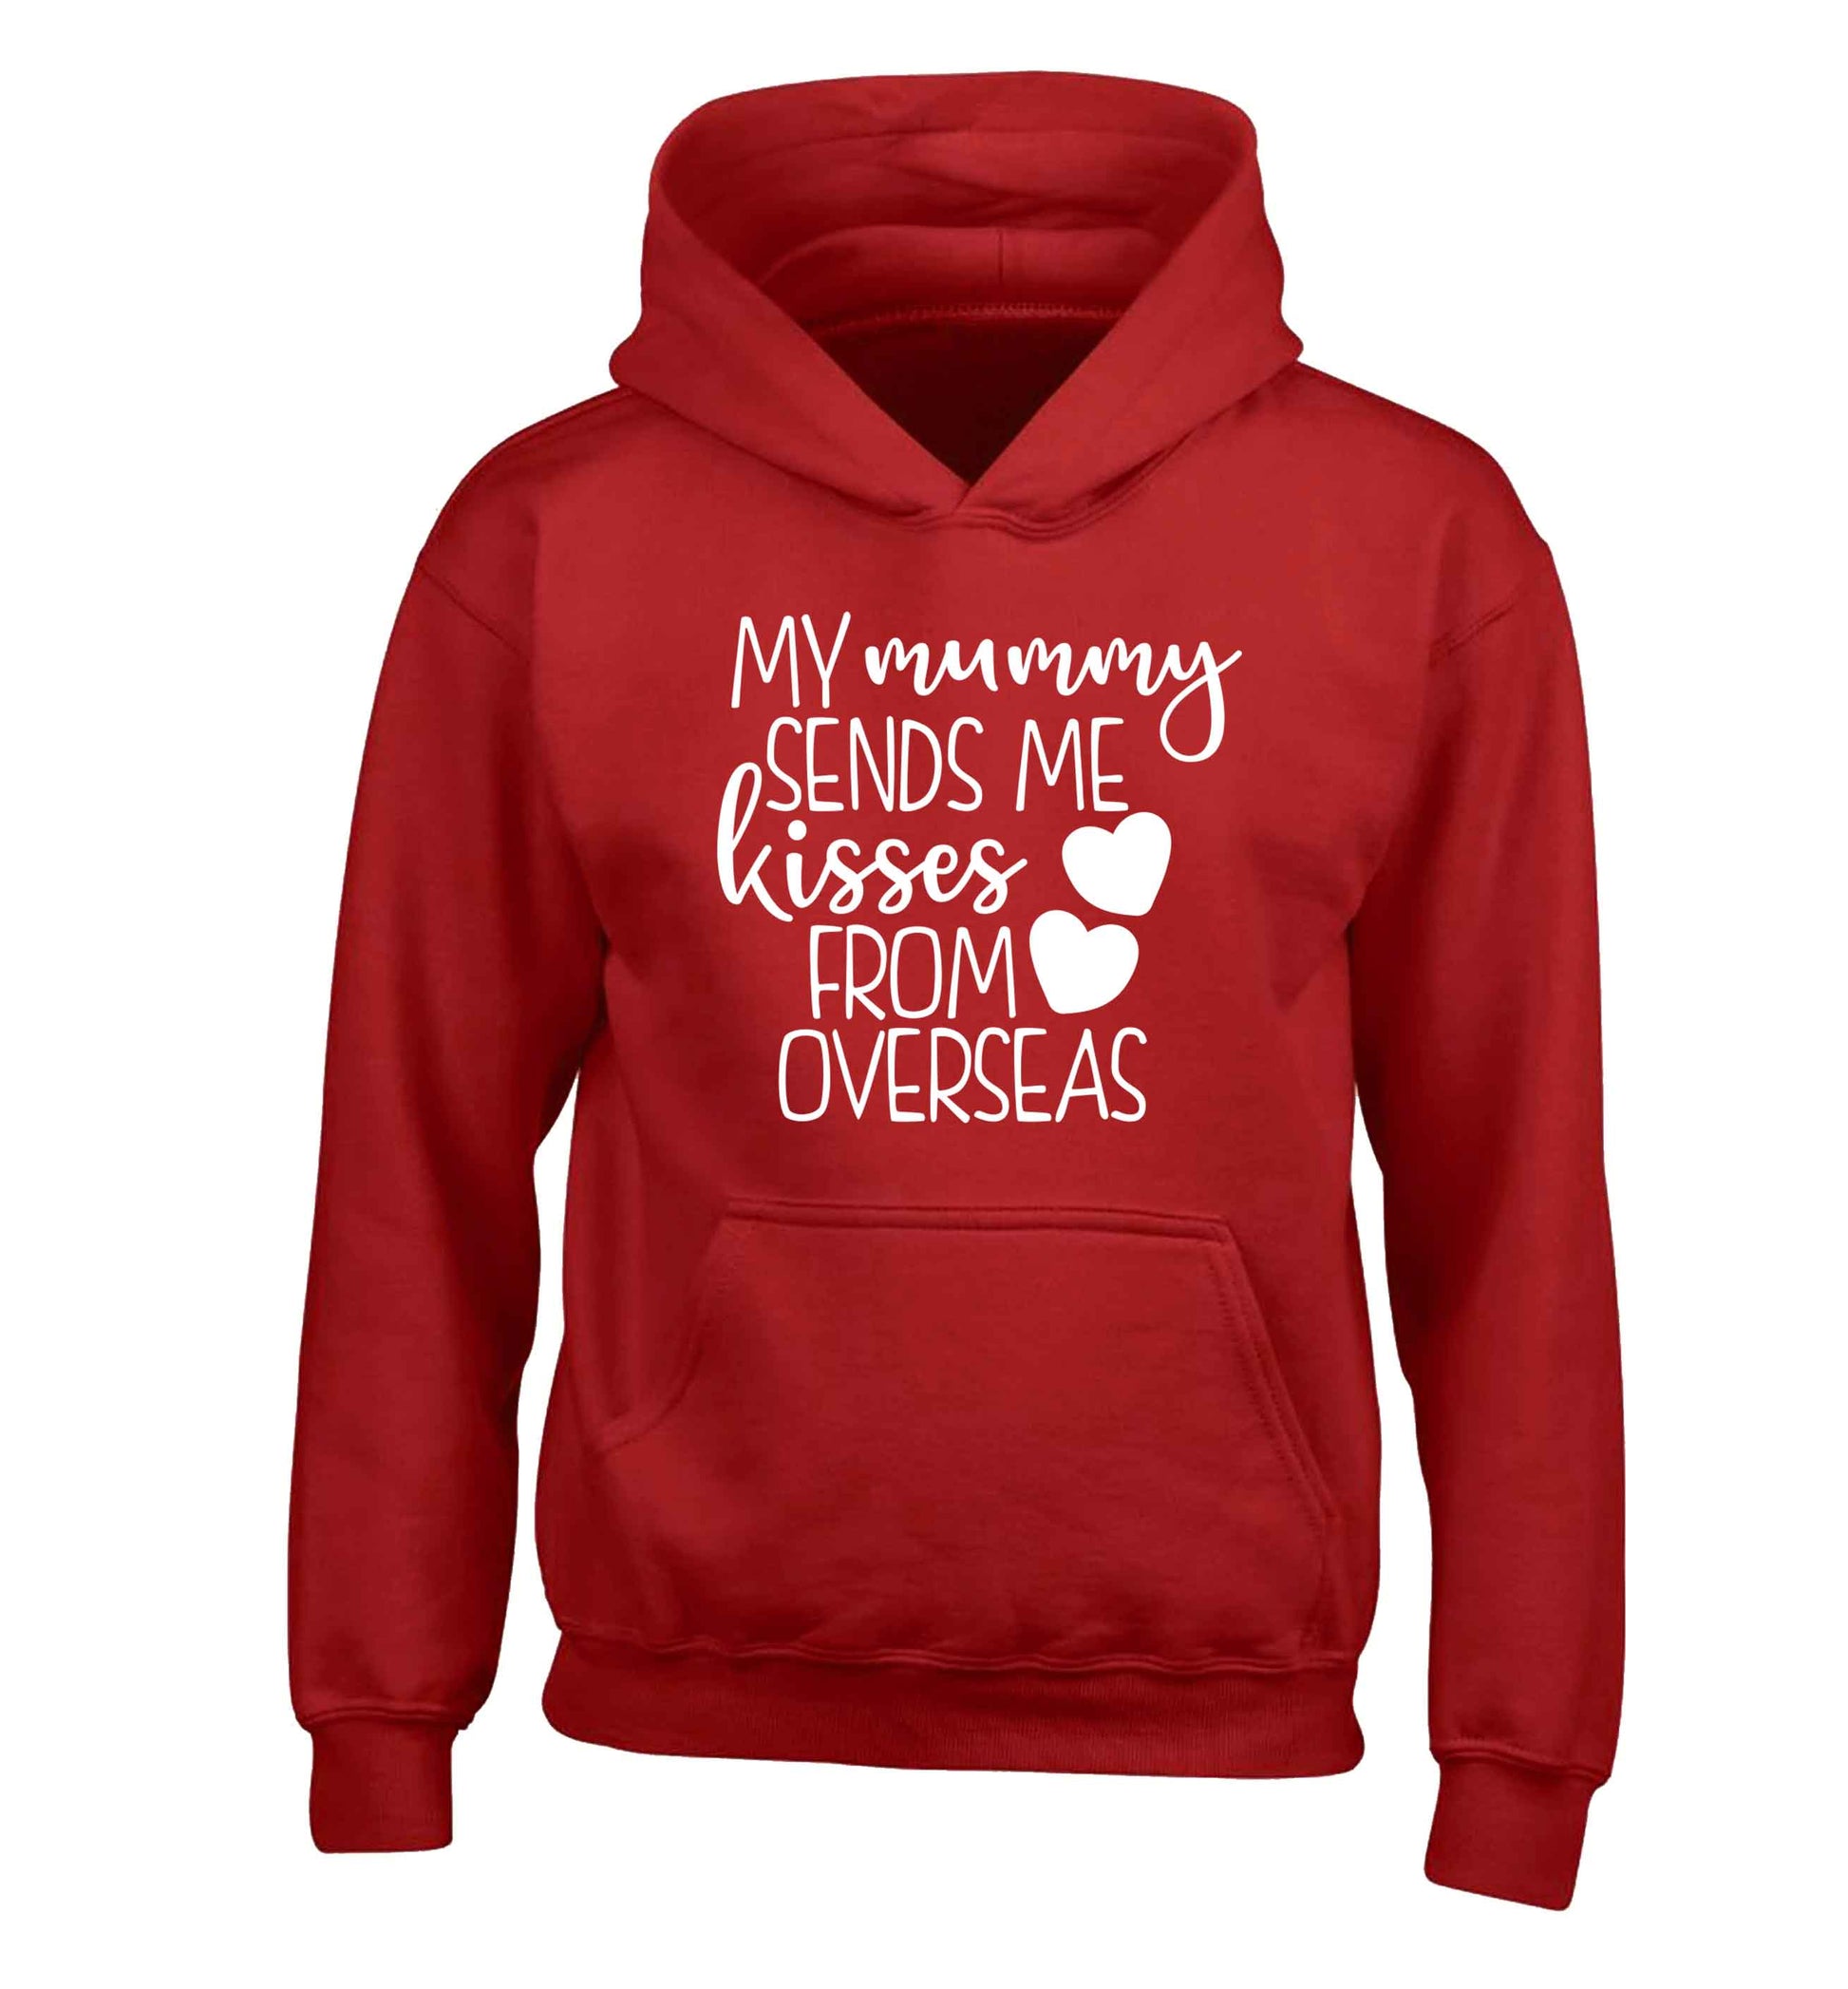 My mummy sends me kisses from overseas children's red hoodie 12-13 Years